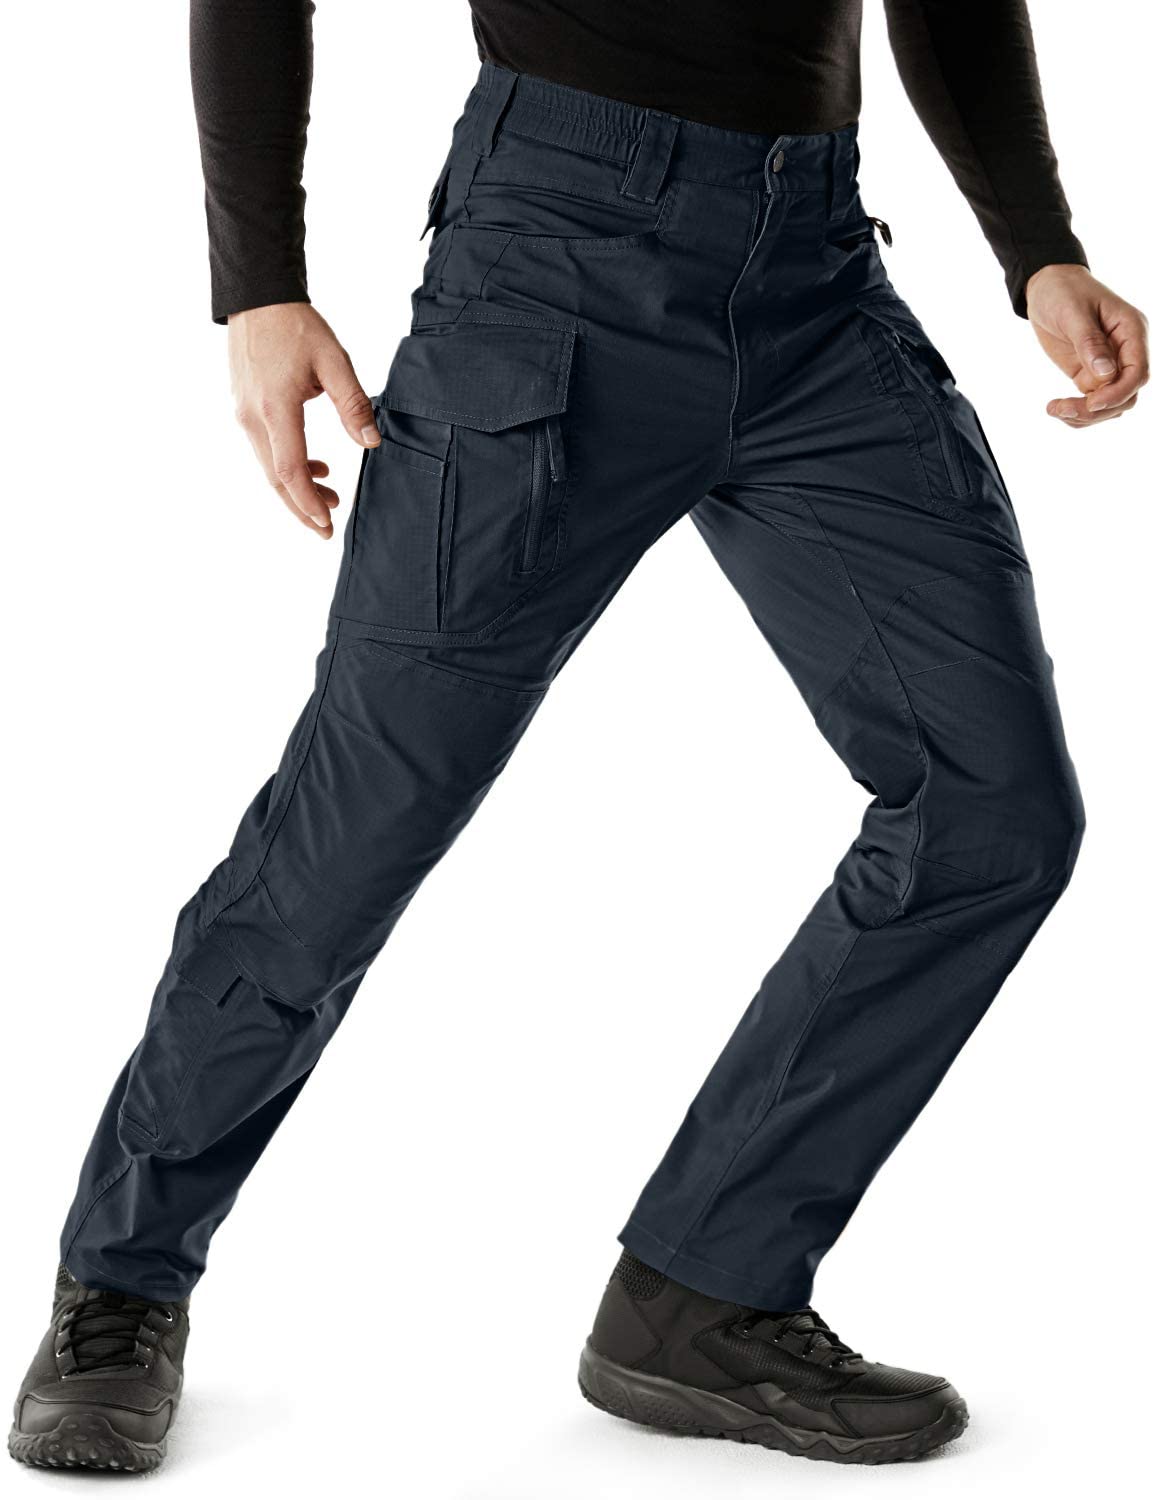 CQR Womens Flex Stretch Tactical Pants Elastic Waist Straight/Cargo Pants with Pockets Water Repellent Ripstop Work Pants 